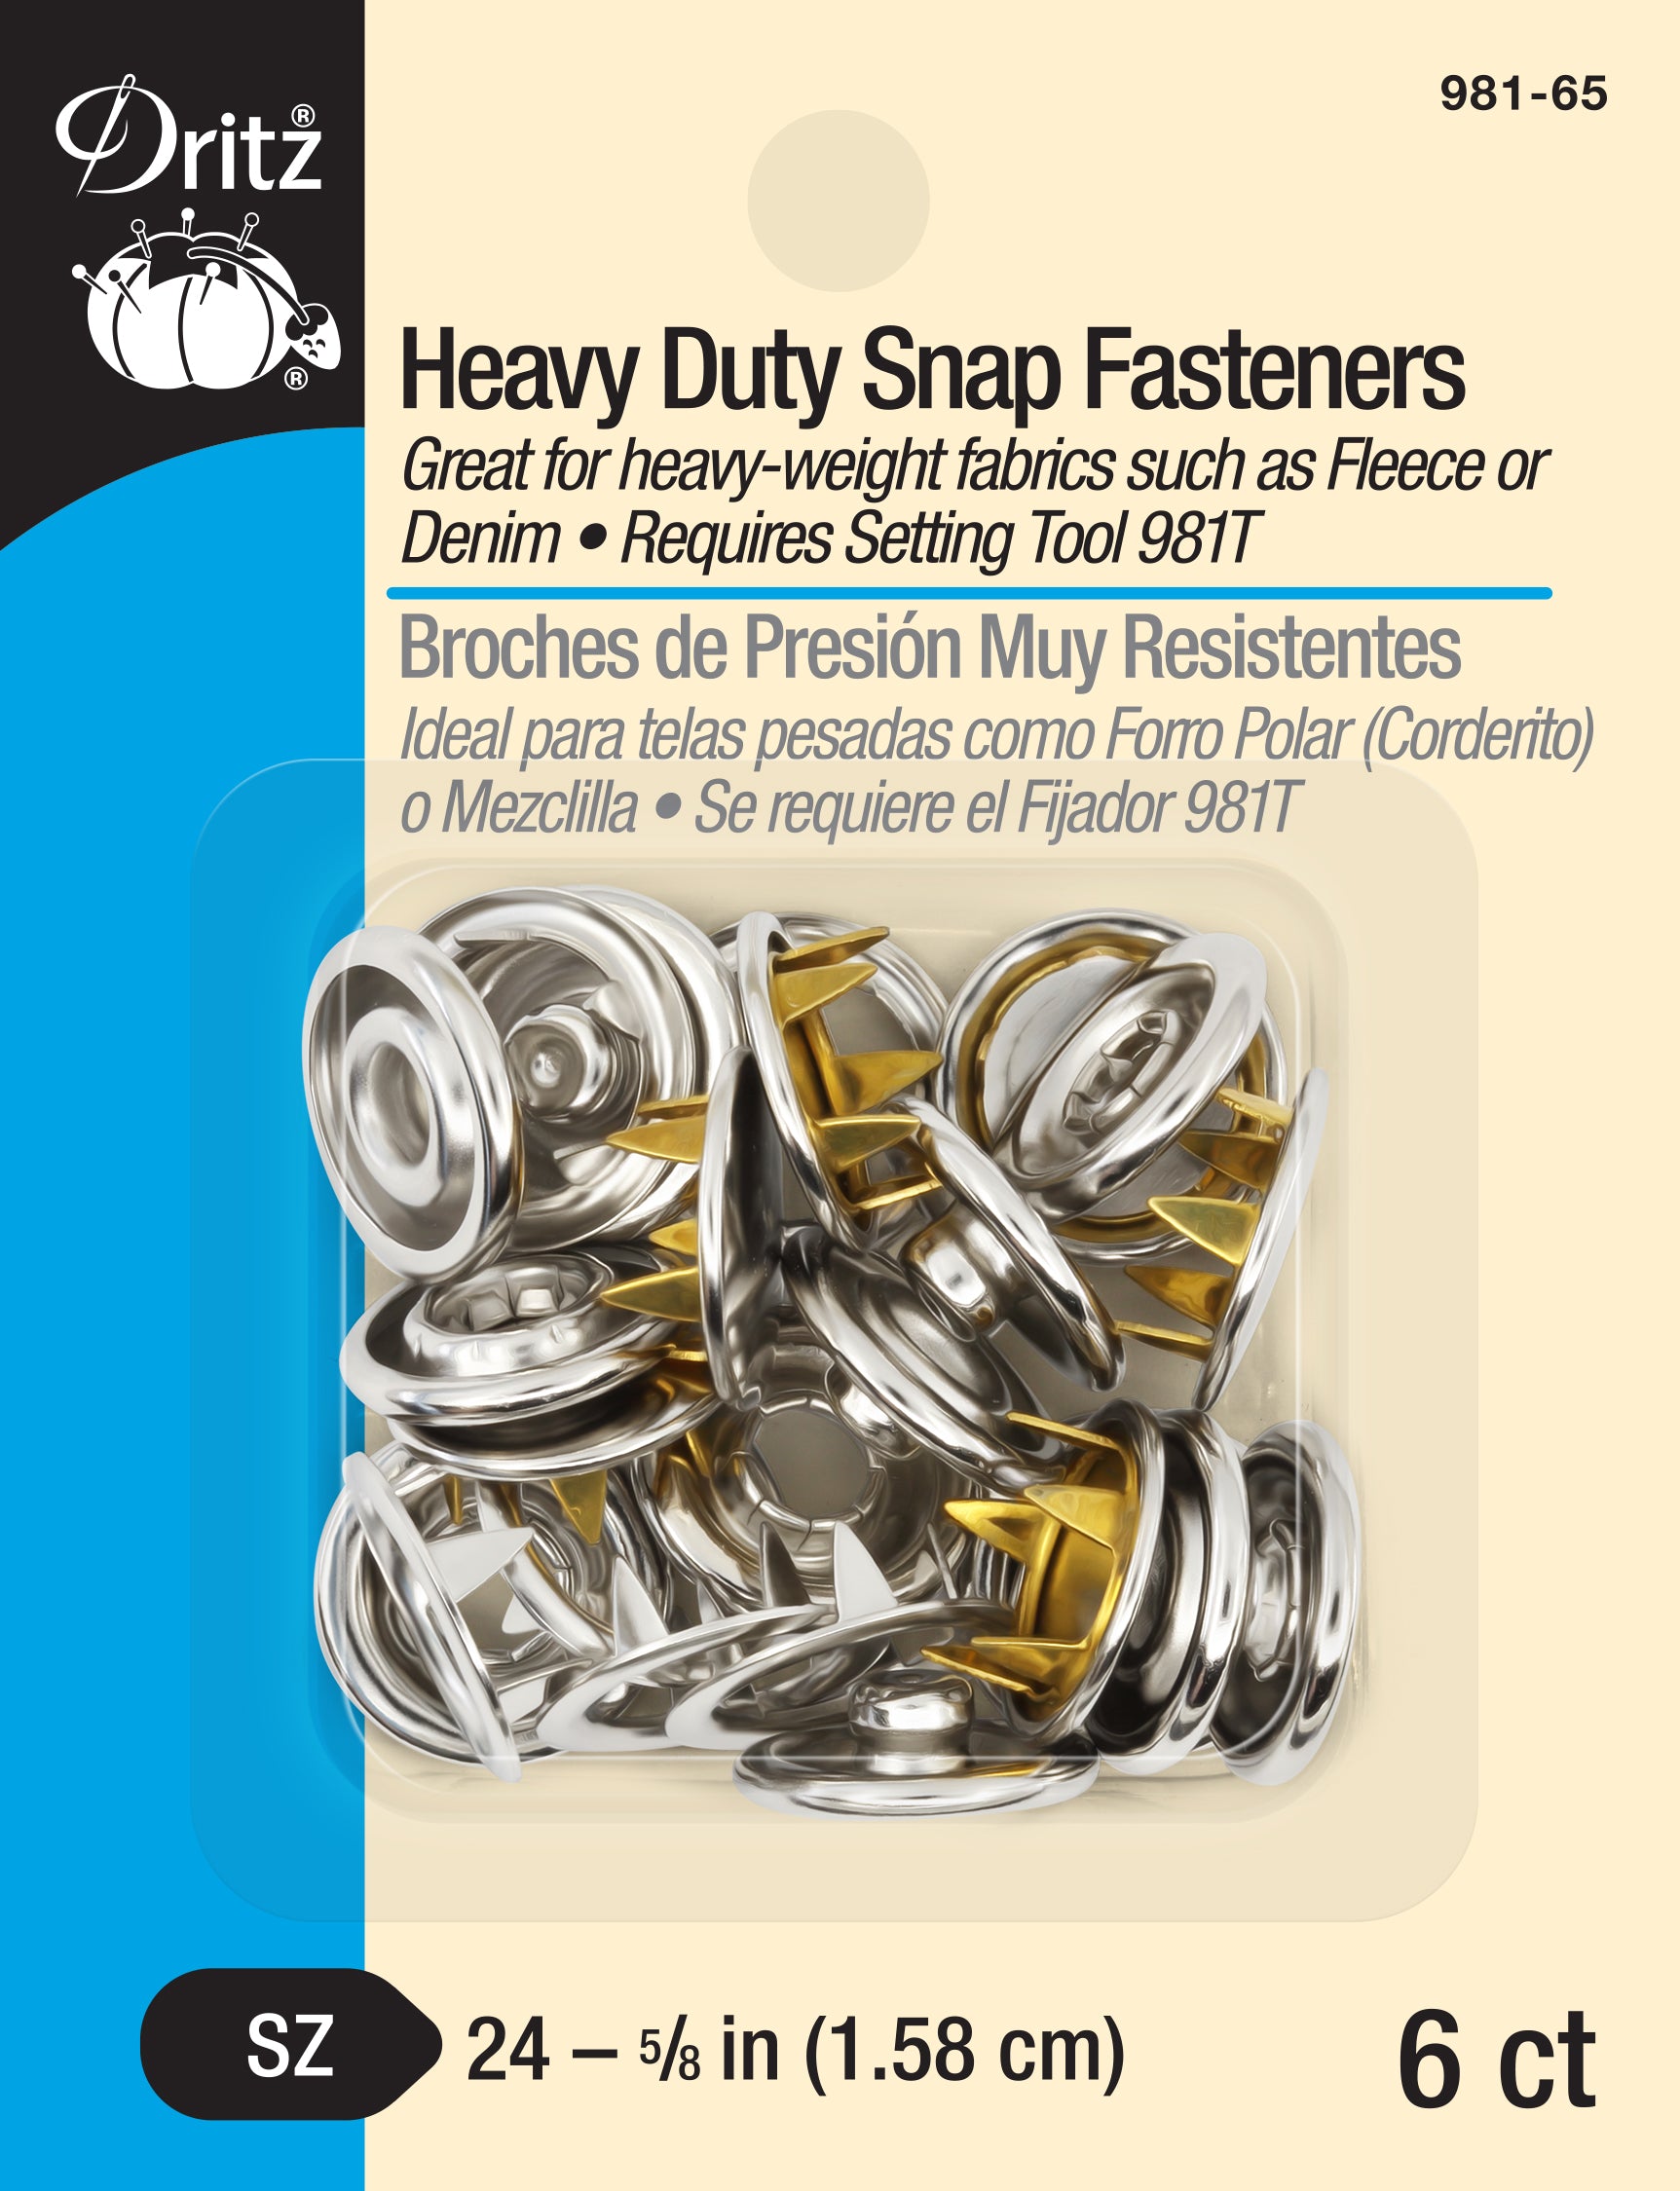 Cup Hooks - Reliable Fasteners